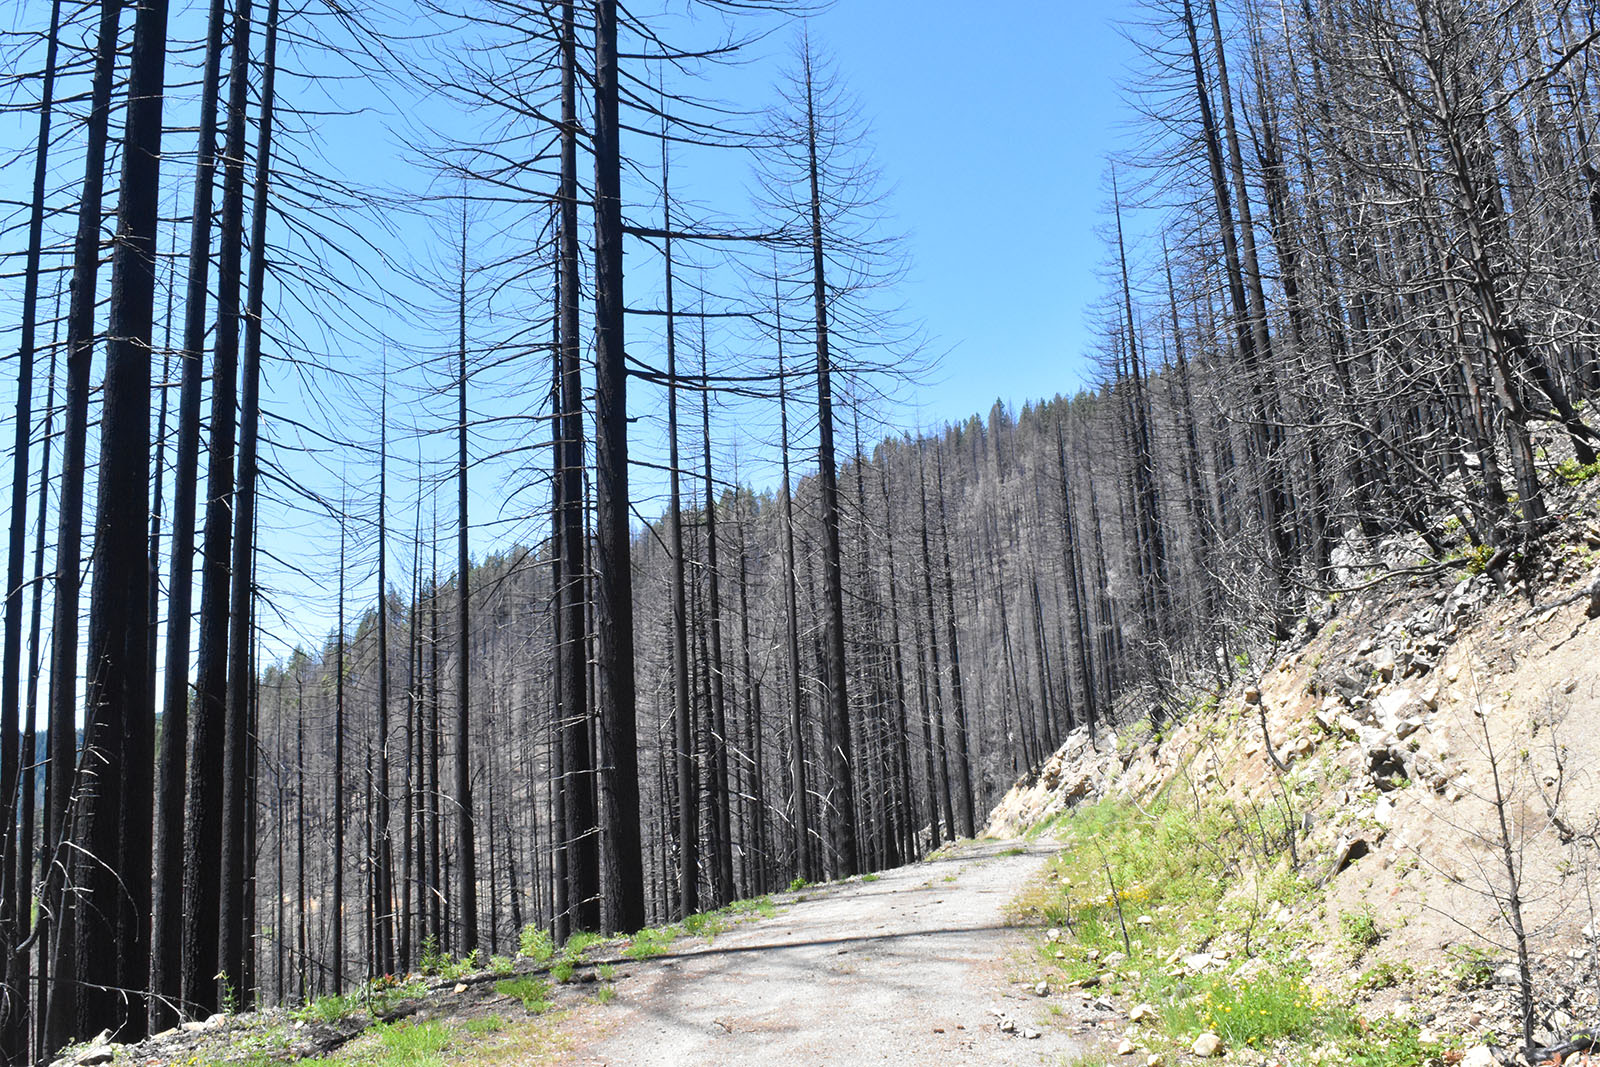 FSEEE Wins Injunction Against Post-fire Logging in Oregon